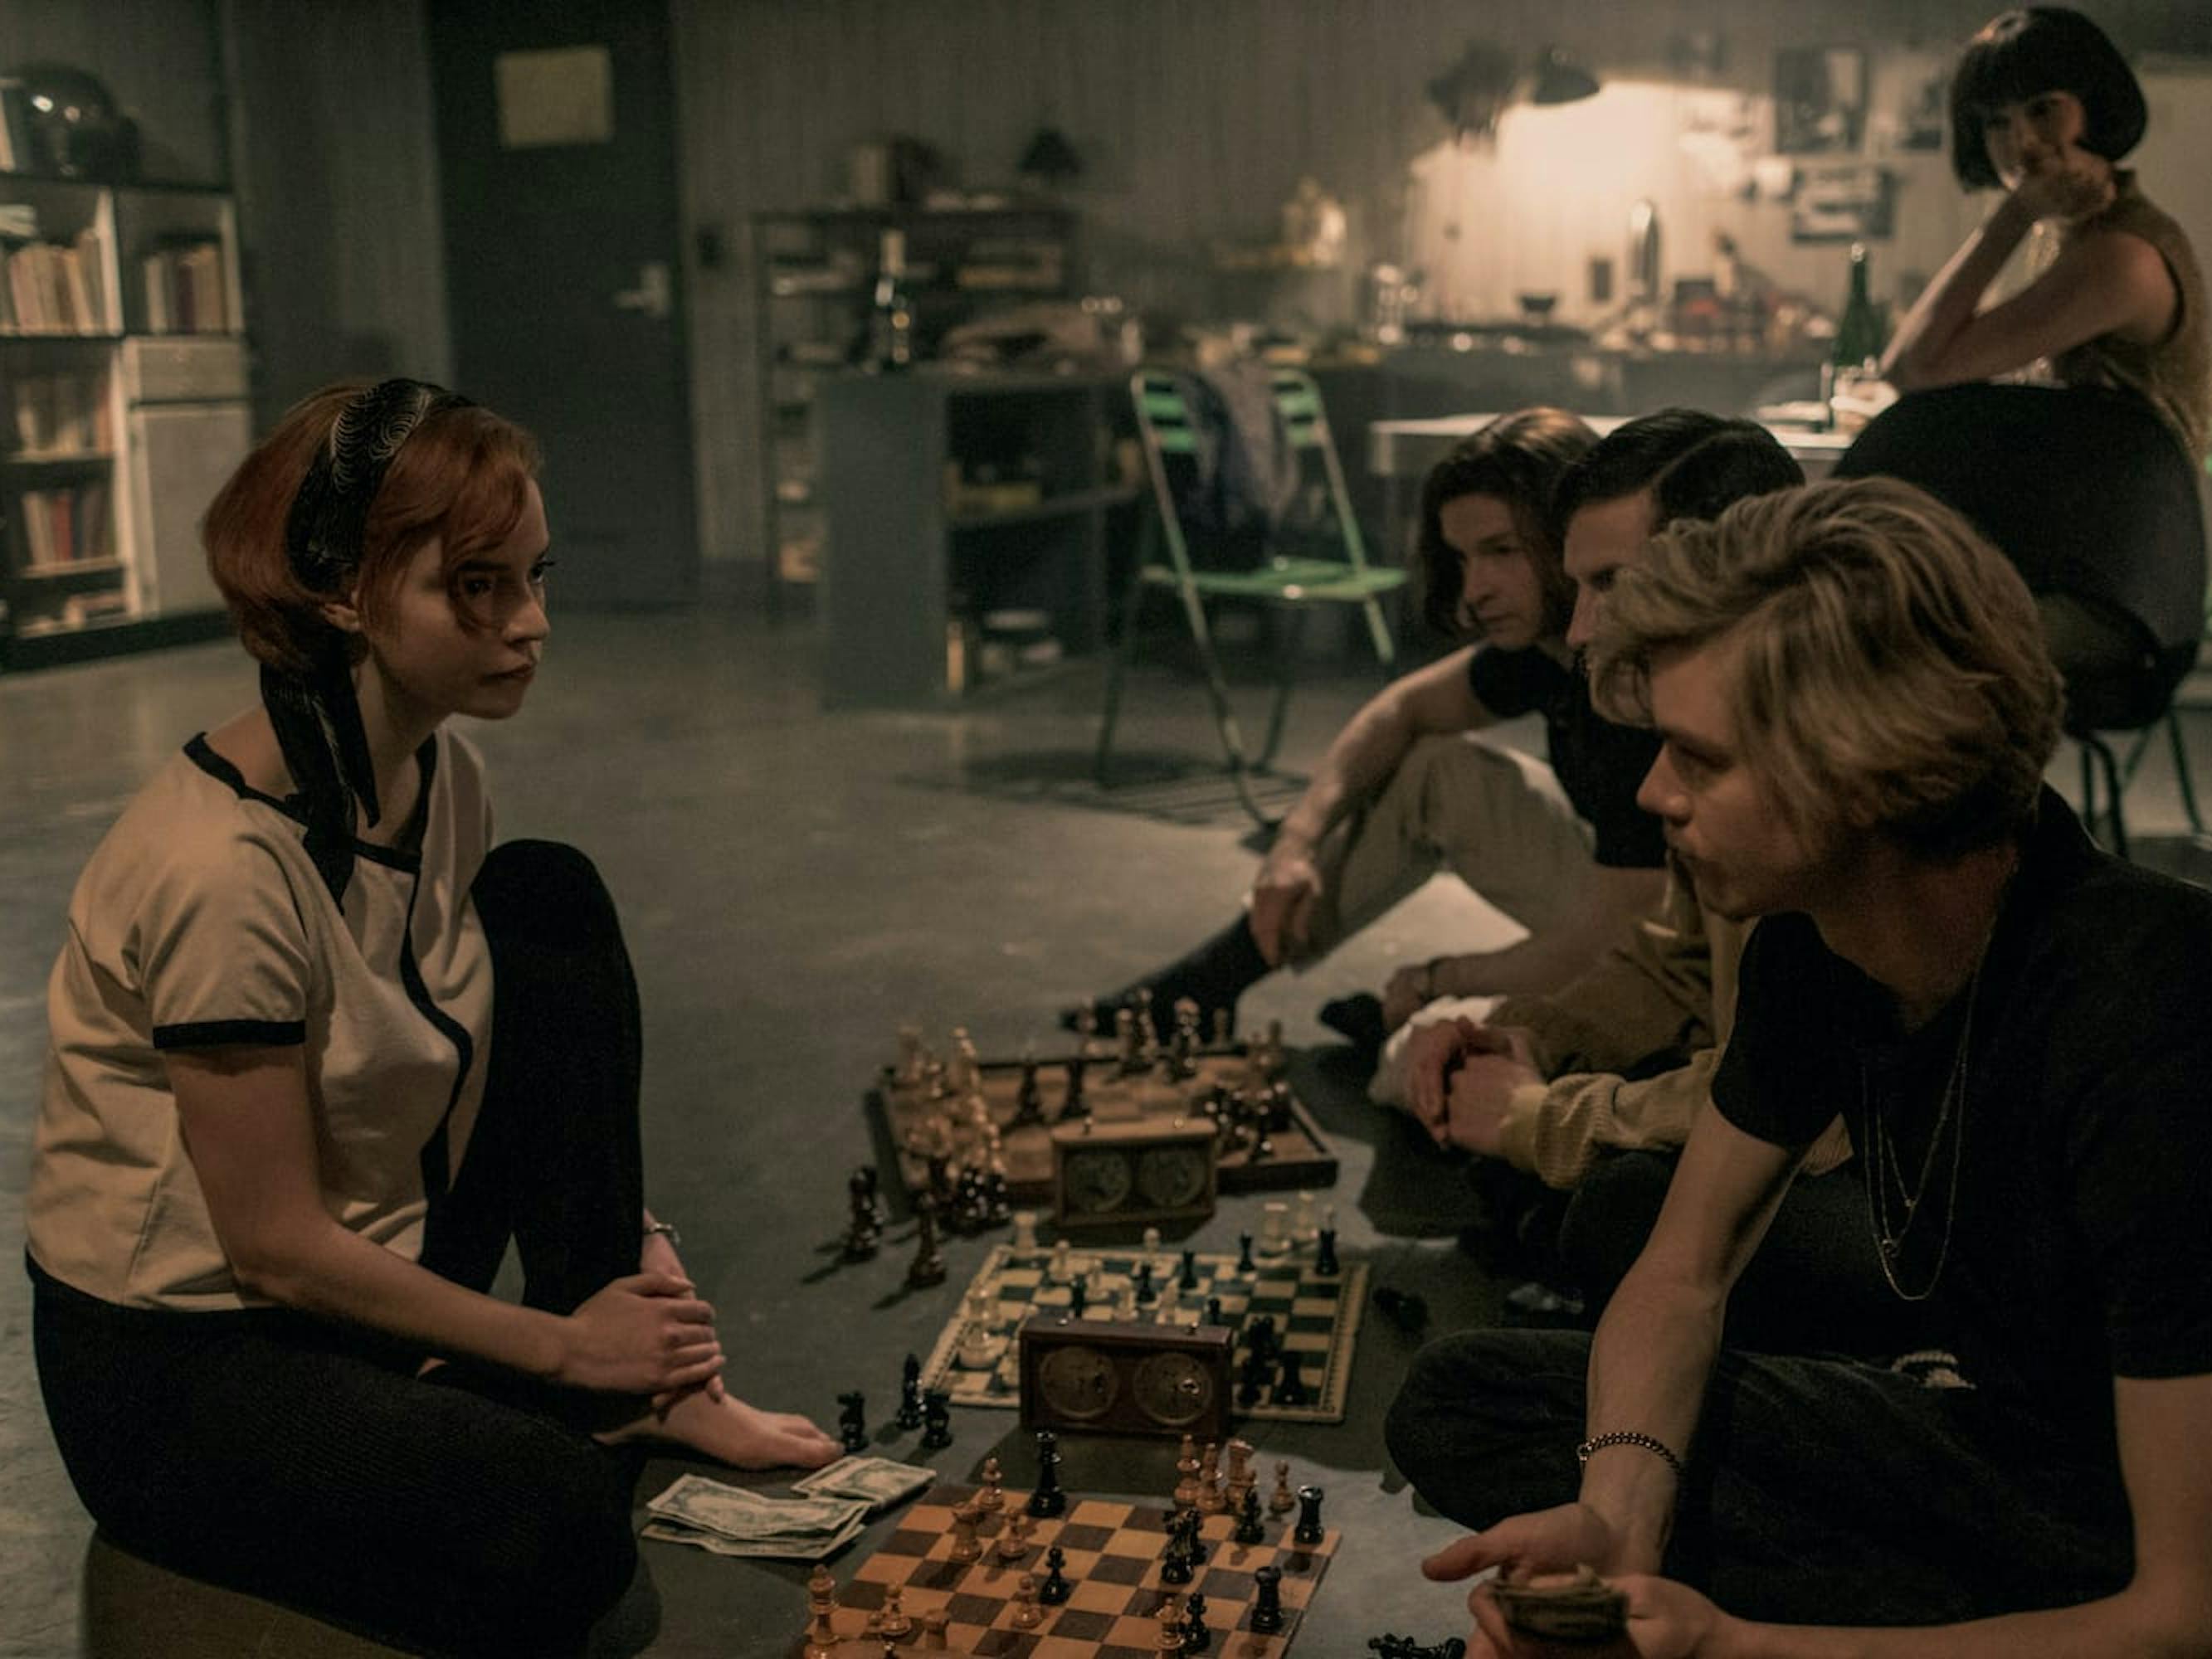 Beth Harmon (Anya Taylor-Joy) and Benny Watts (Thomas Brodie-Sangster) sit ina basement and play chess as three others look on. There are three chess boards on the ground, and green chairs scattered in the background.